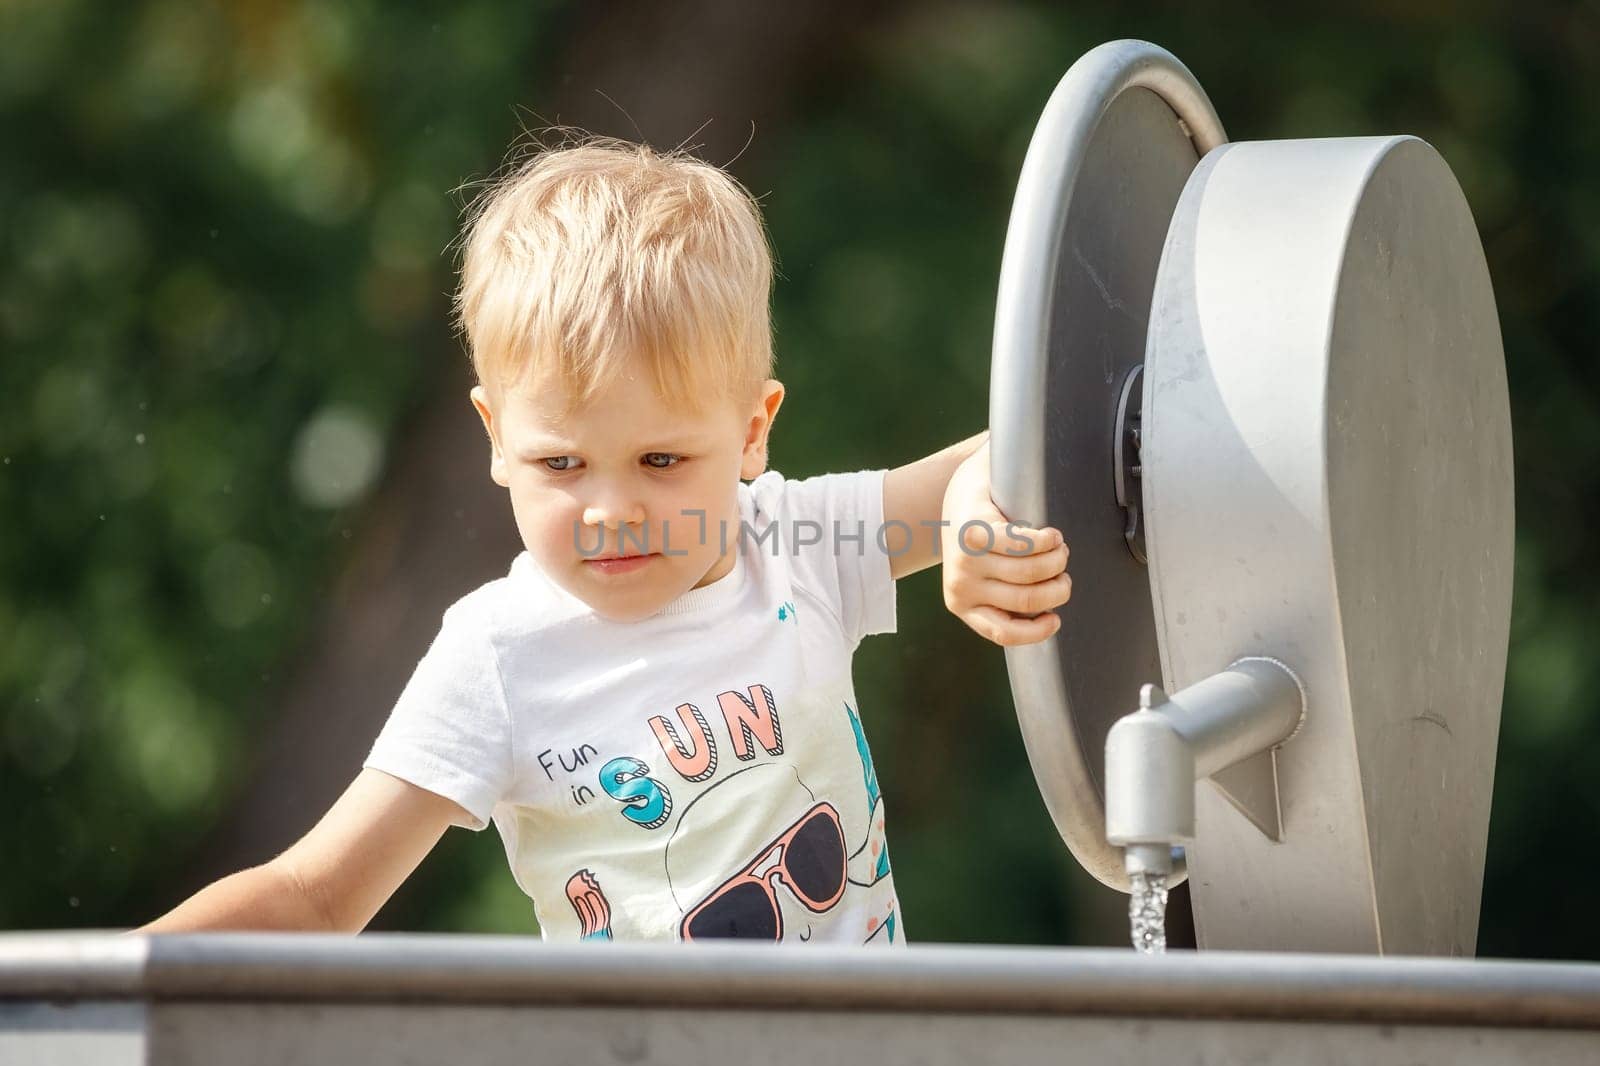 Outdoor portrait of happy little boy playing inside of city fountain on a hot summer day